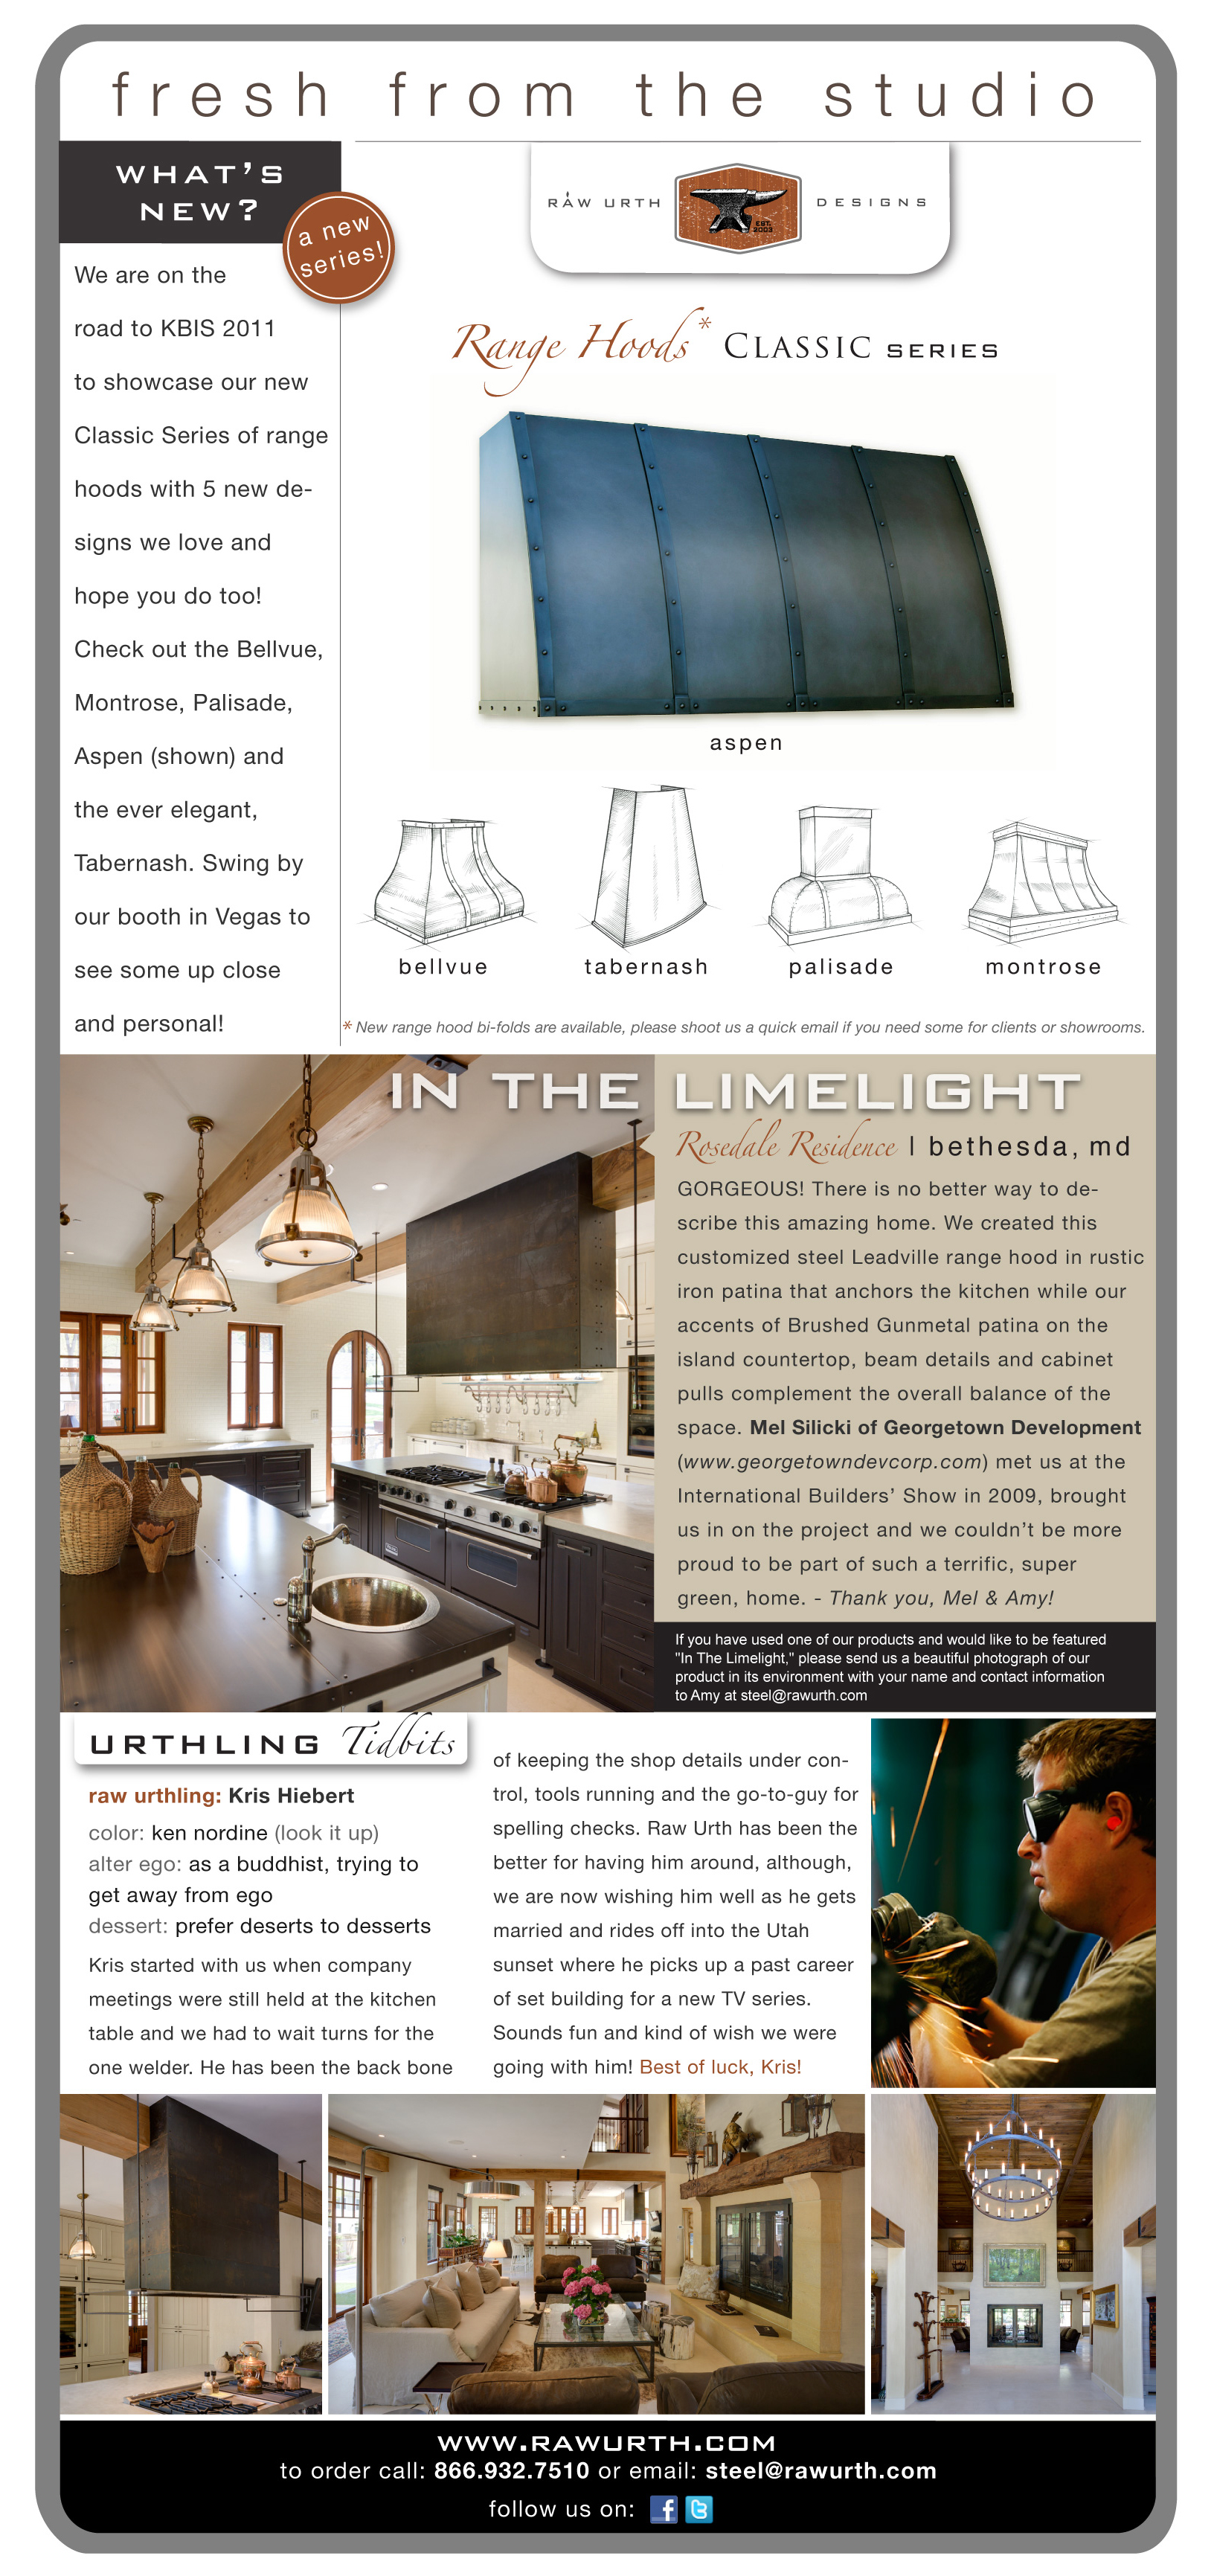 Highlight, fresh from the studio, In the Limelight features our designs of Aspen, Bellevue, Tabernash, Montrose and Palisade.